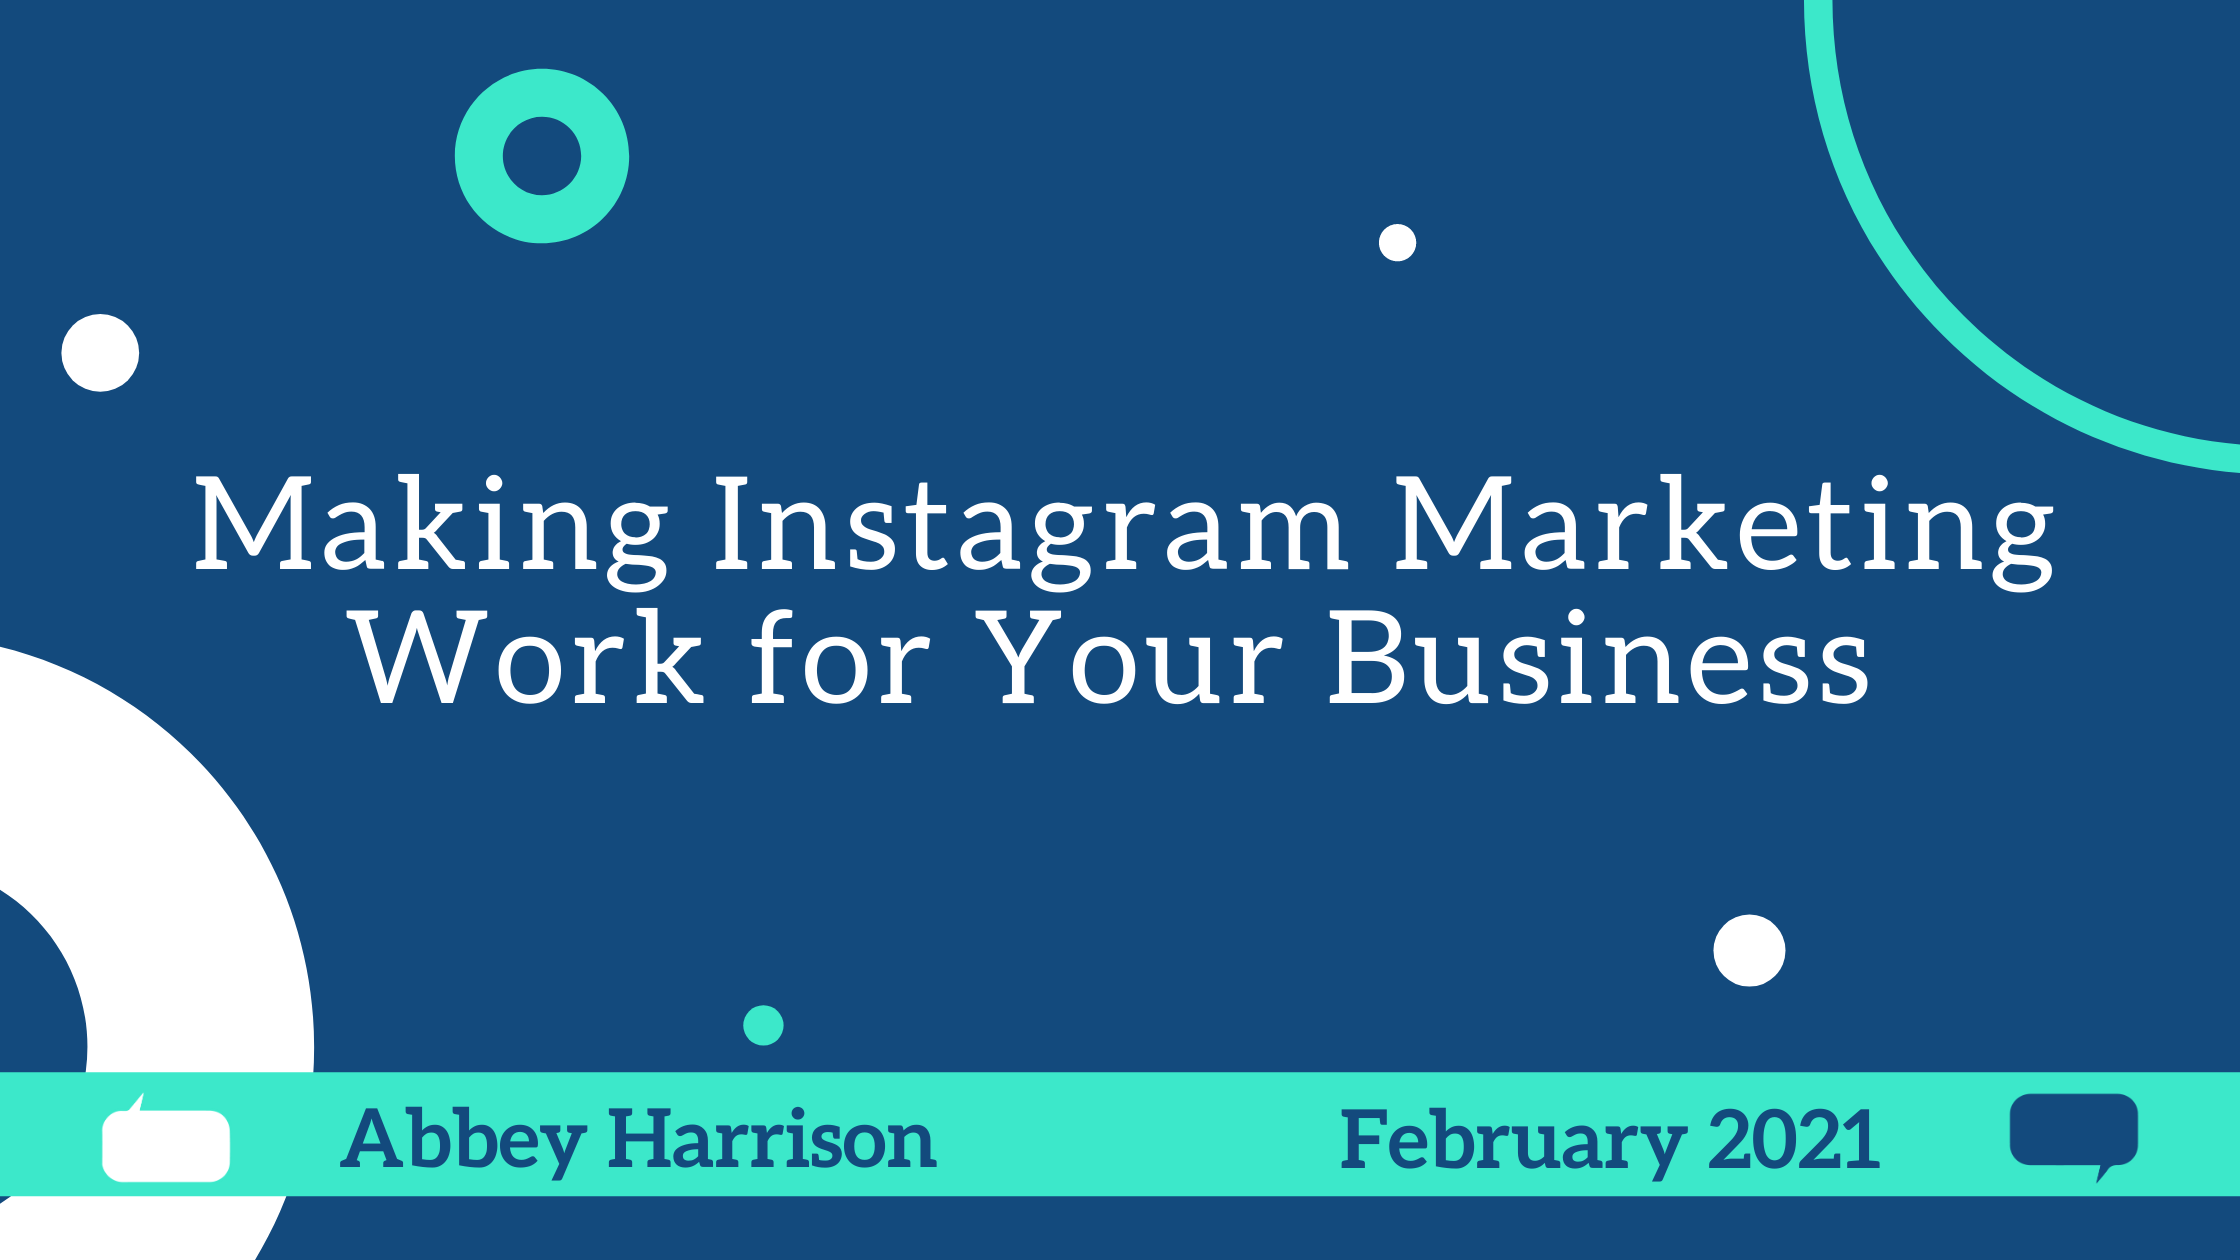 Making Instagram Marketing Work for Your Business